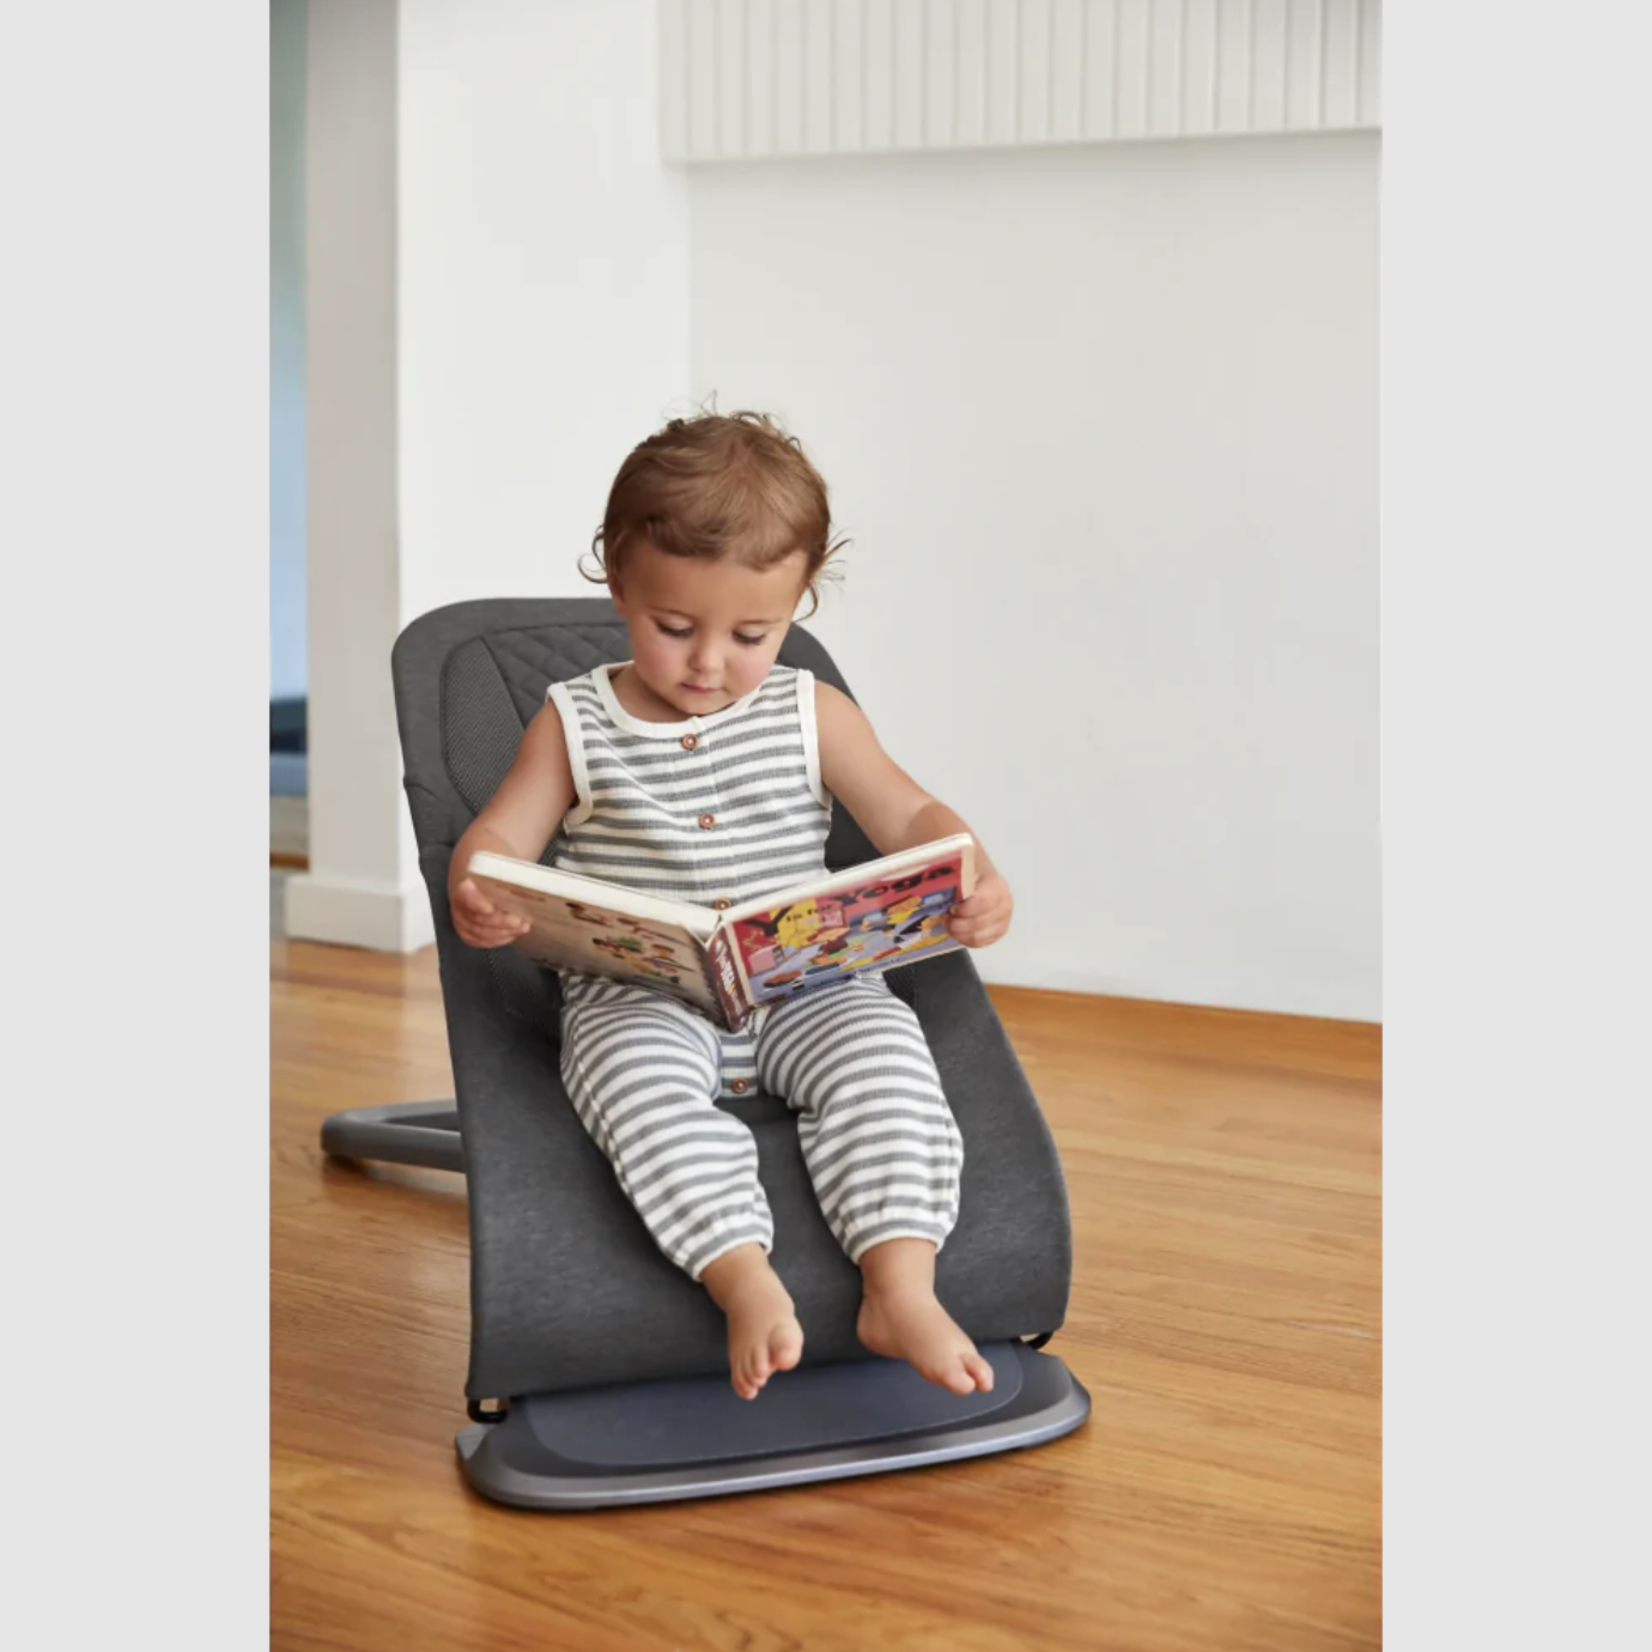 ERGOBABY EVOLVE 3 IN 1 BOUNCER - CHARCOAL GREY